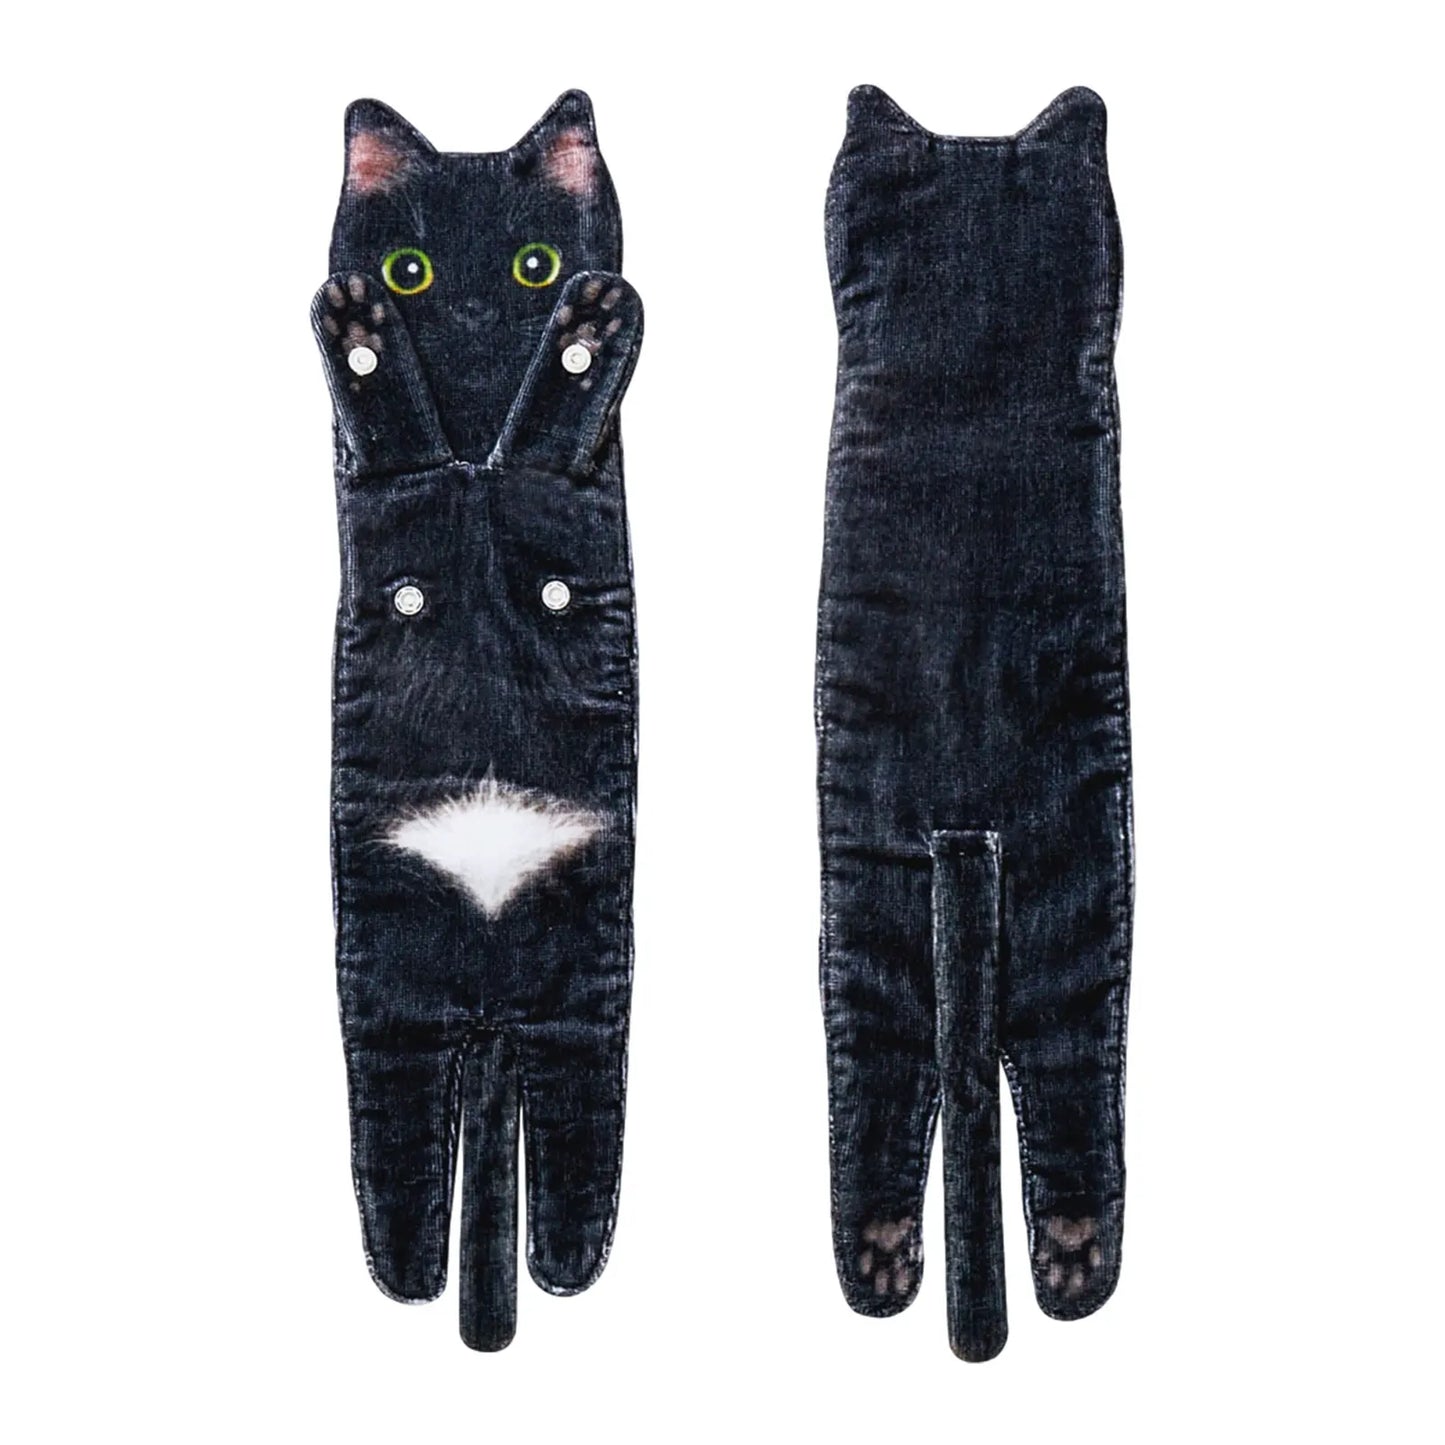 Creative and Humorous Cat-Themed Hand Towels: Soft, Absorbent, and Perfect for Your Kitchen or Bathroom - Nekoby Creative and Humorous Cat-Themed Hand Towels: Soft, Absorbent, and Perfect for Your Kitchen or Bathroom black cat||14 / CHINA||200007763